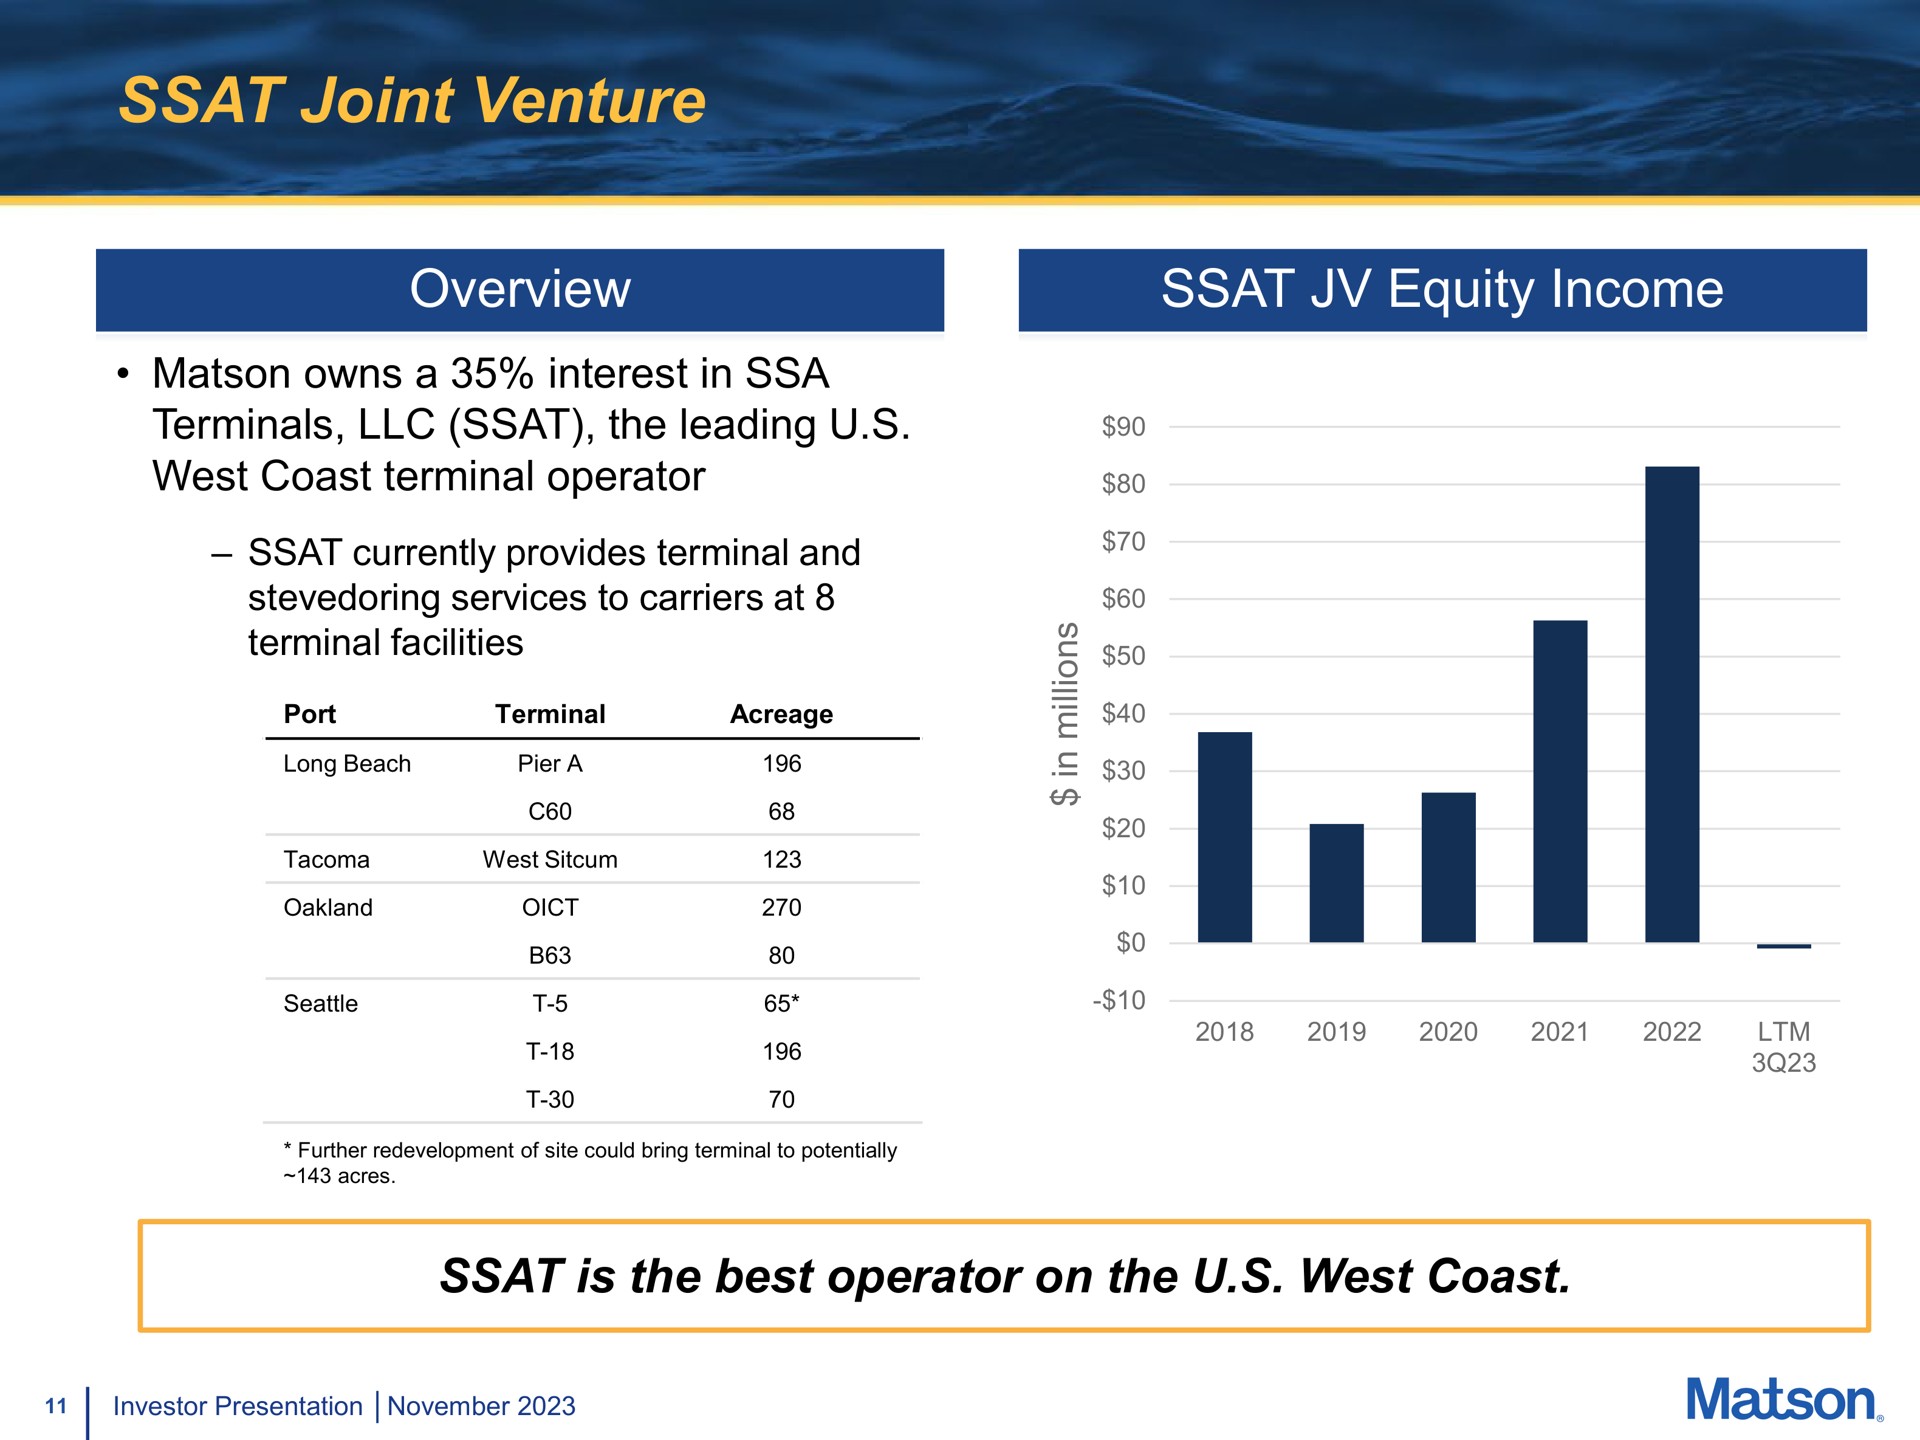 joint venture overview equity income owns a interest in terminals the leading west coast terminal operator currently provides terminal and stevedoring services to carriers at terminal facilities is the best operator on the west coast a | Matson